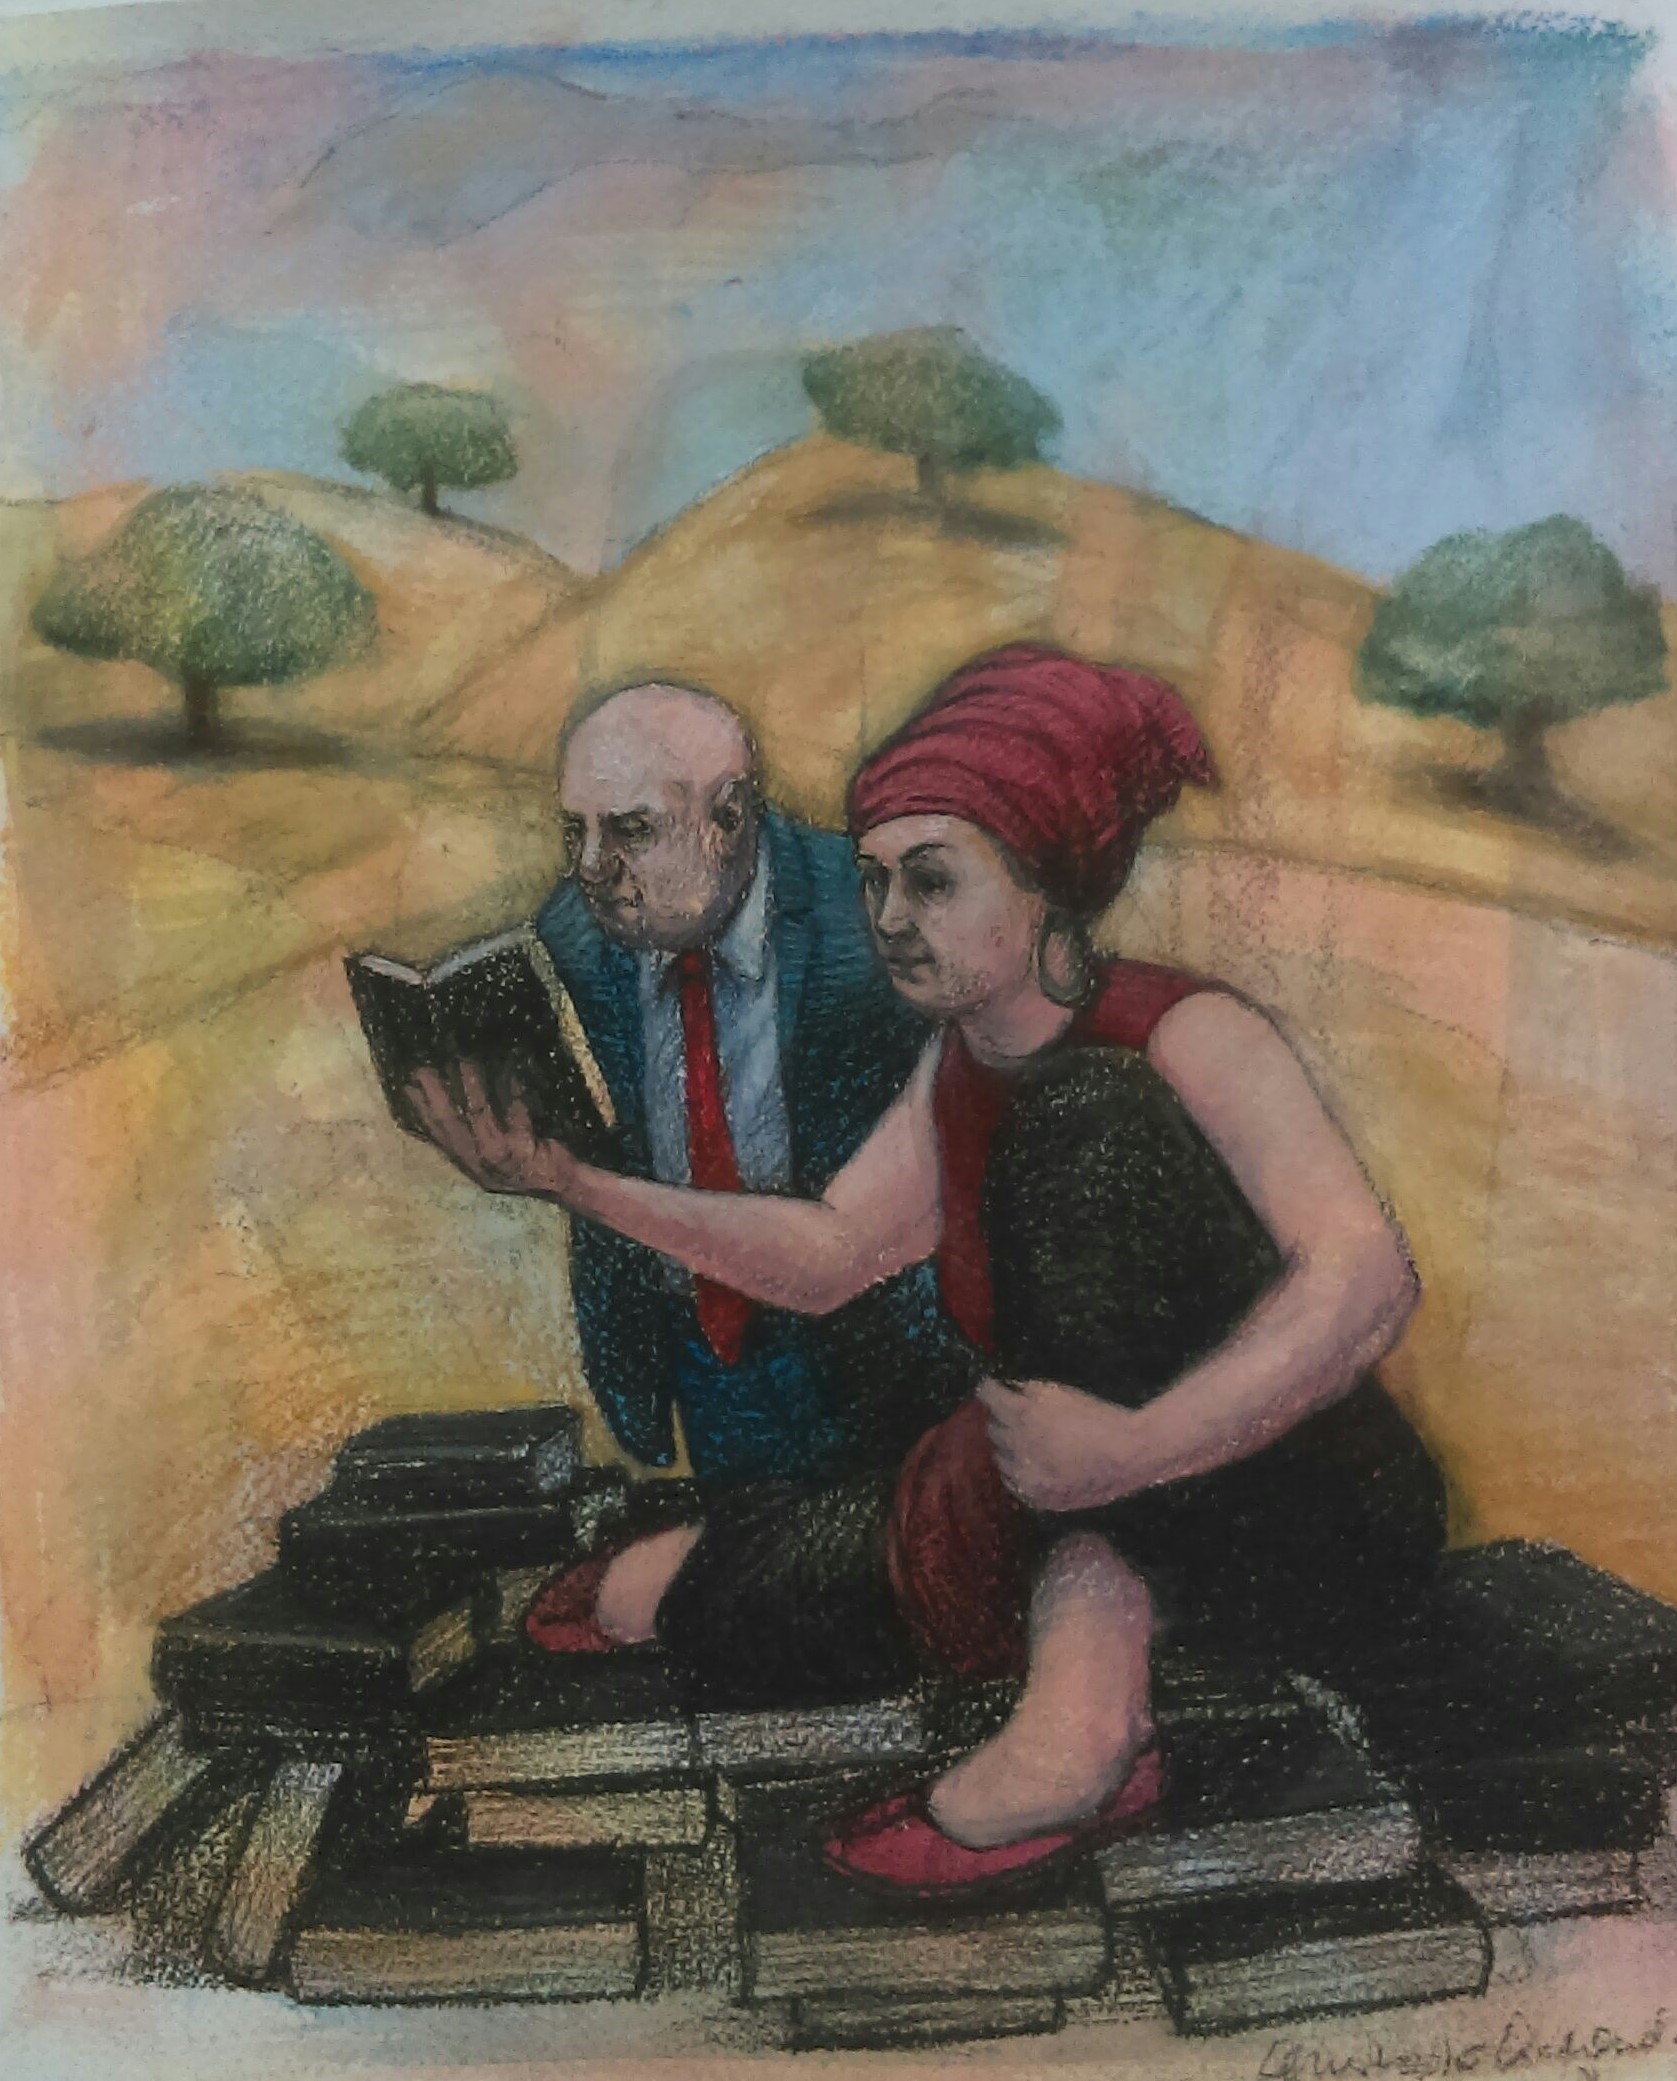 Christopher Orchard_Reader_acrylic and charcoal on paper_33 x 28cm (2)